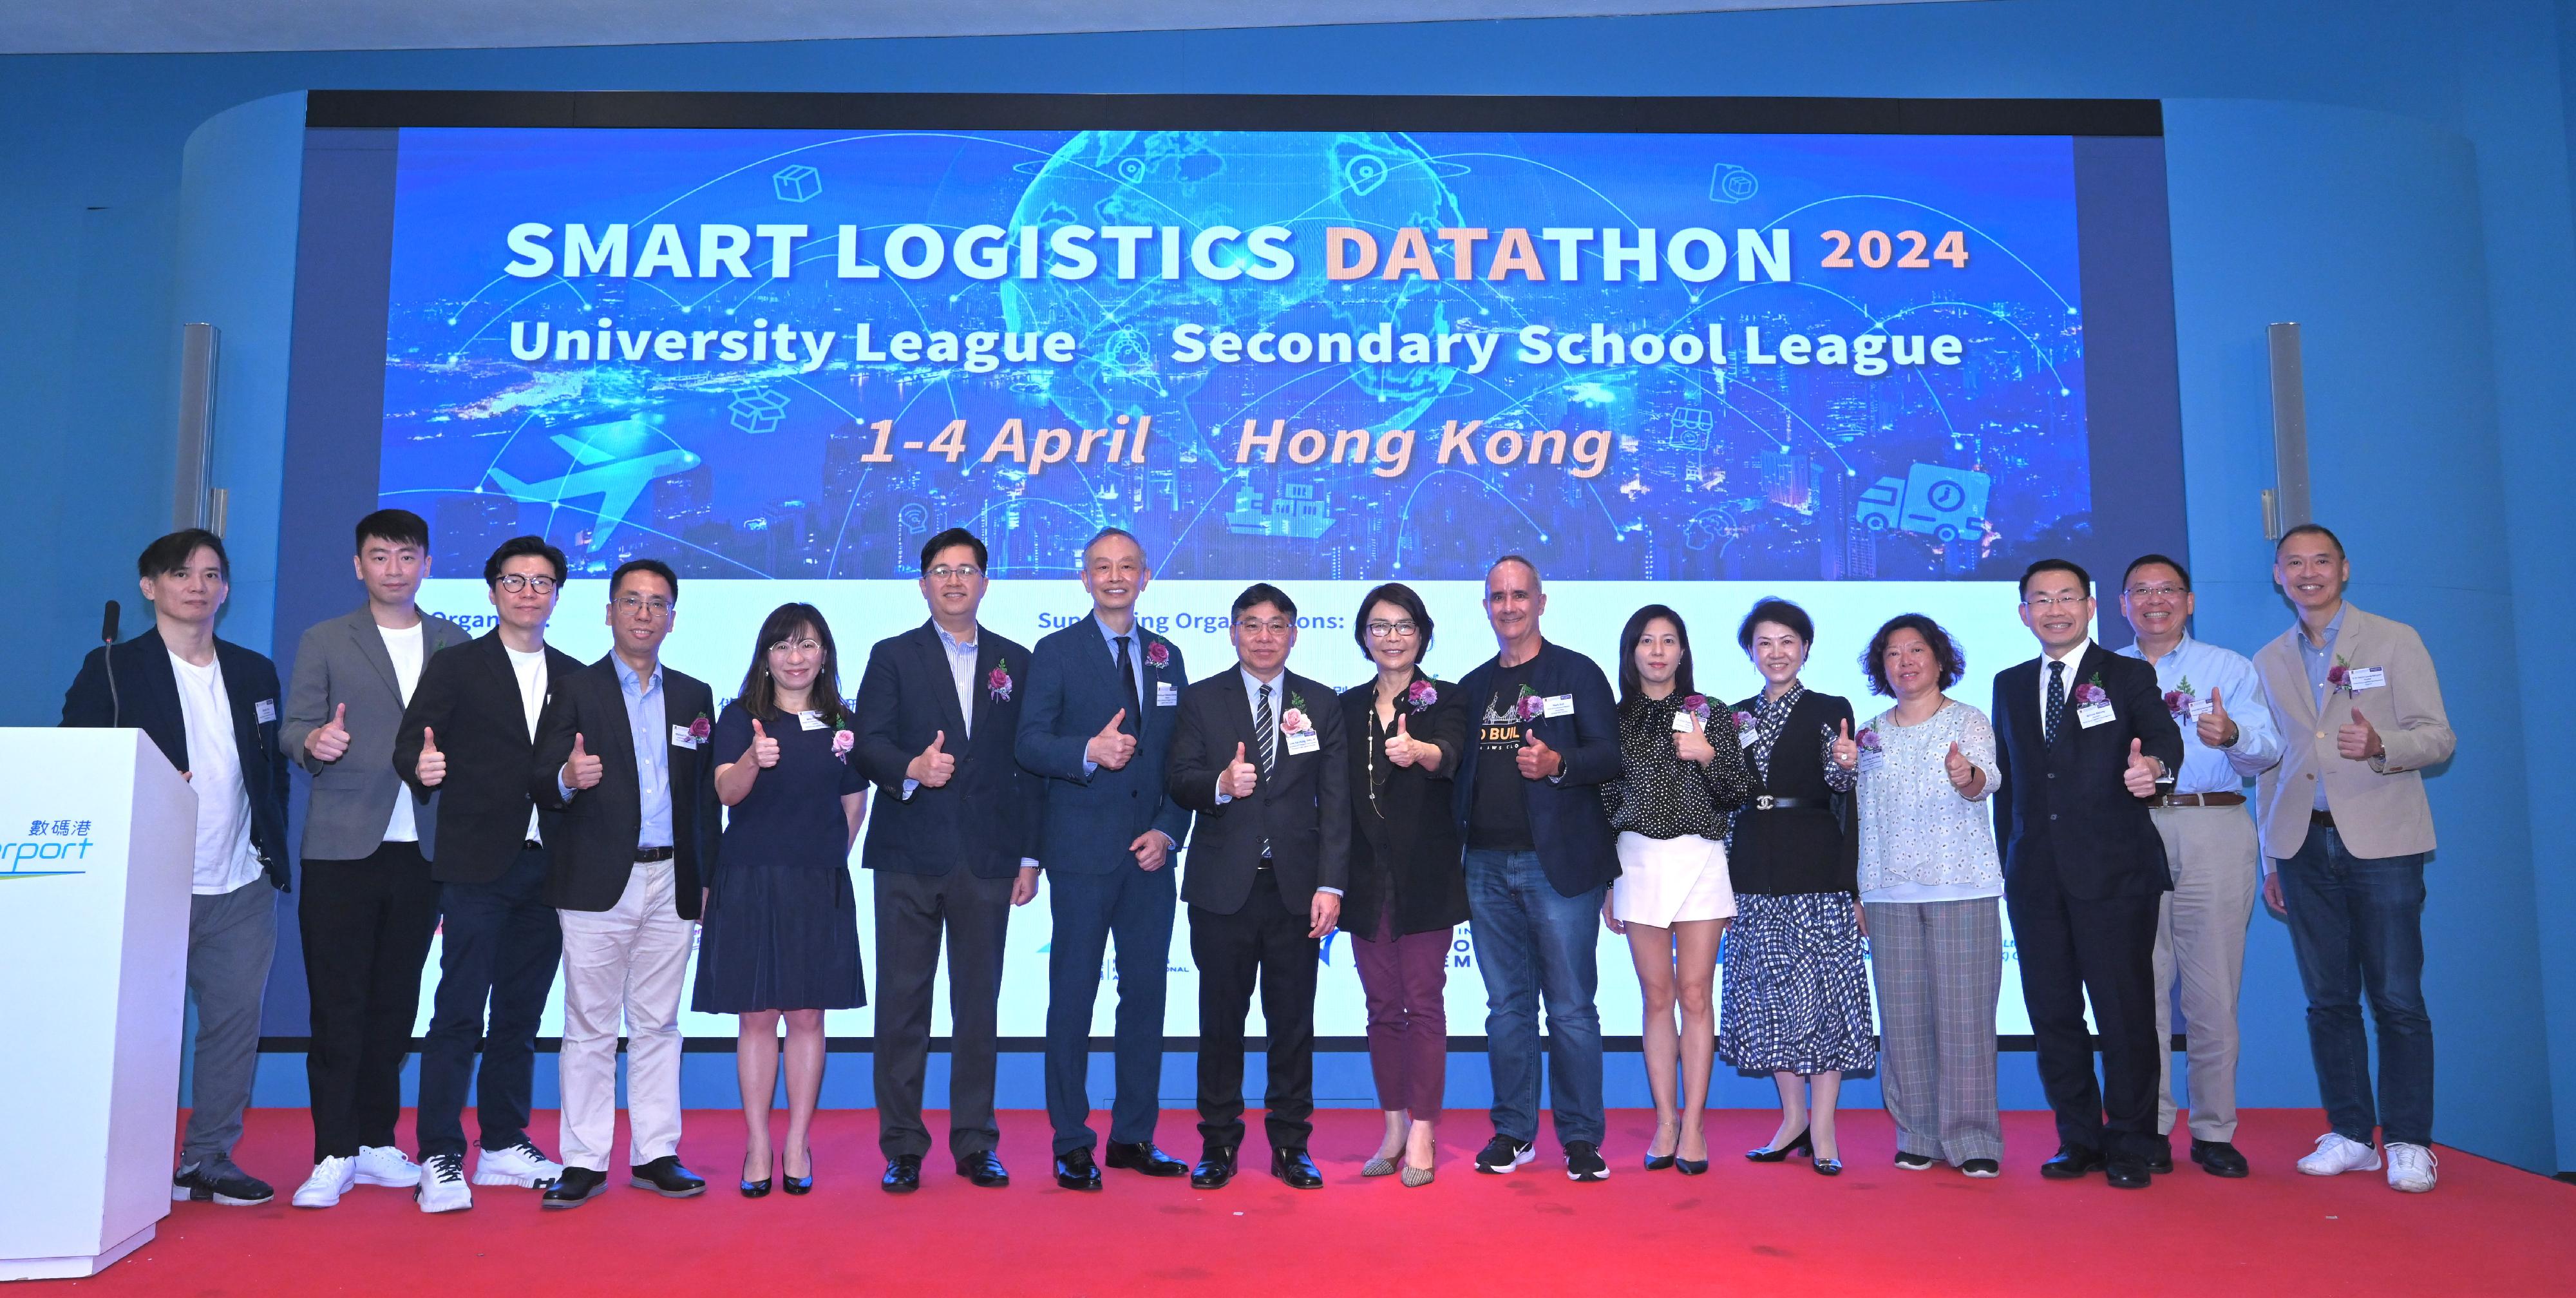 The Smart Logistics Datathon 2024 officially started today (April 2). The Secretary for Transport and Logistics, Mr Lam Sai-hung (eighth left), is pictured with Director of the Asian Institute of Supply Chains & Logistics, Professor Cheung Wai-man (seventh left), and other guests at the opening ceremony.